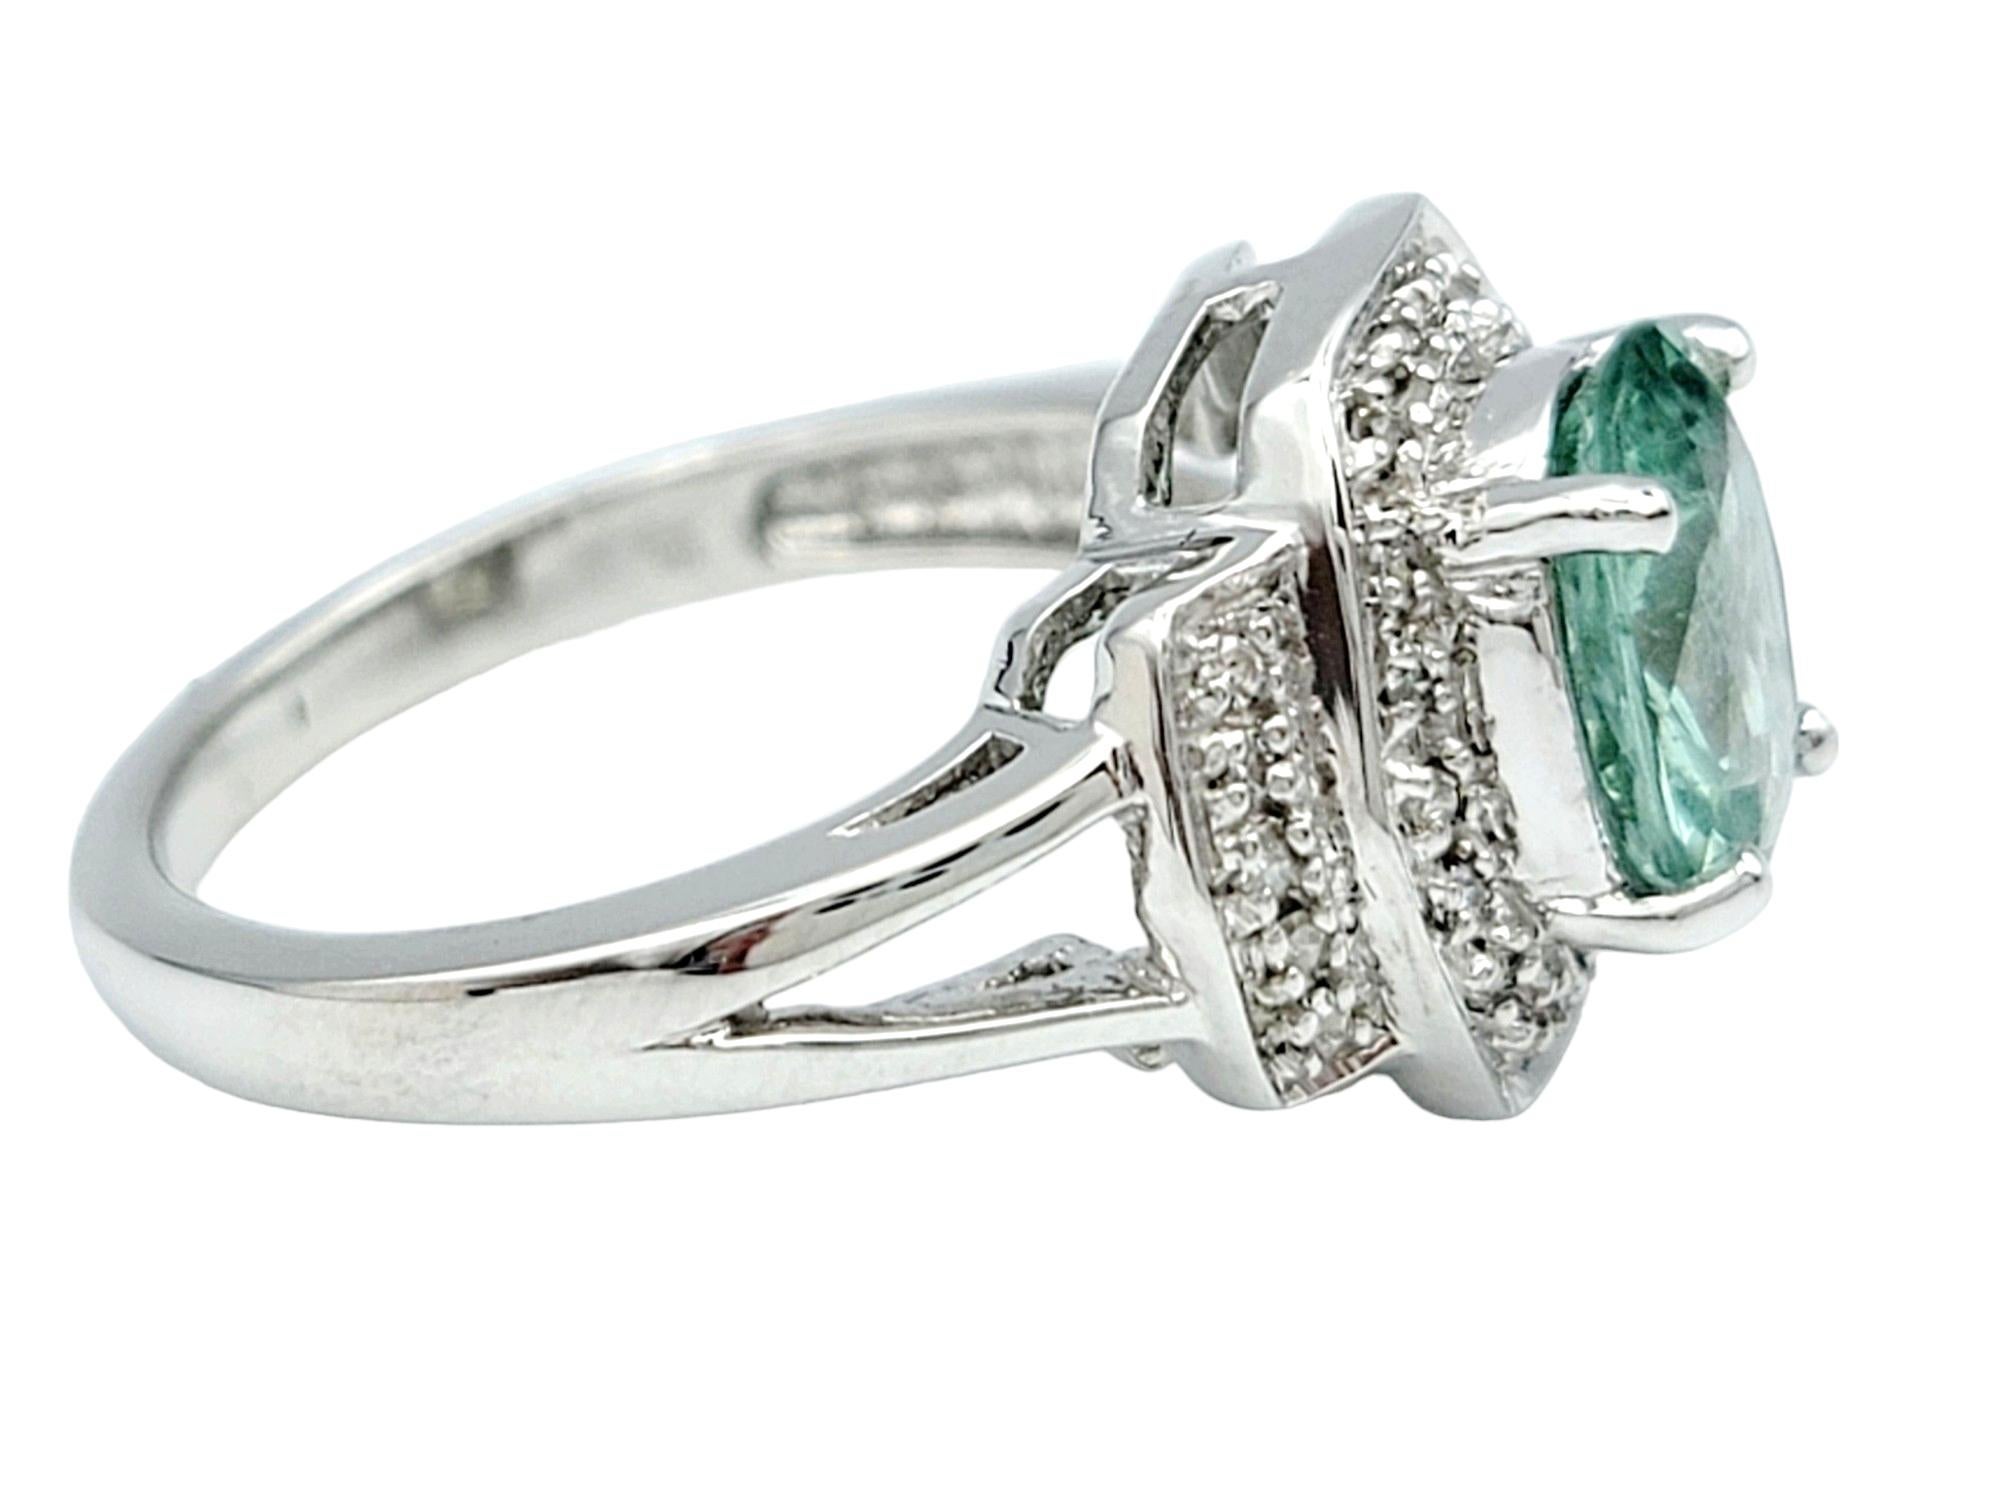 Oval Cut Oval Paraiba Tourmaline Ring with Round Diamond Halo Set in 18 Karat White Gold For Sale